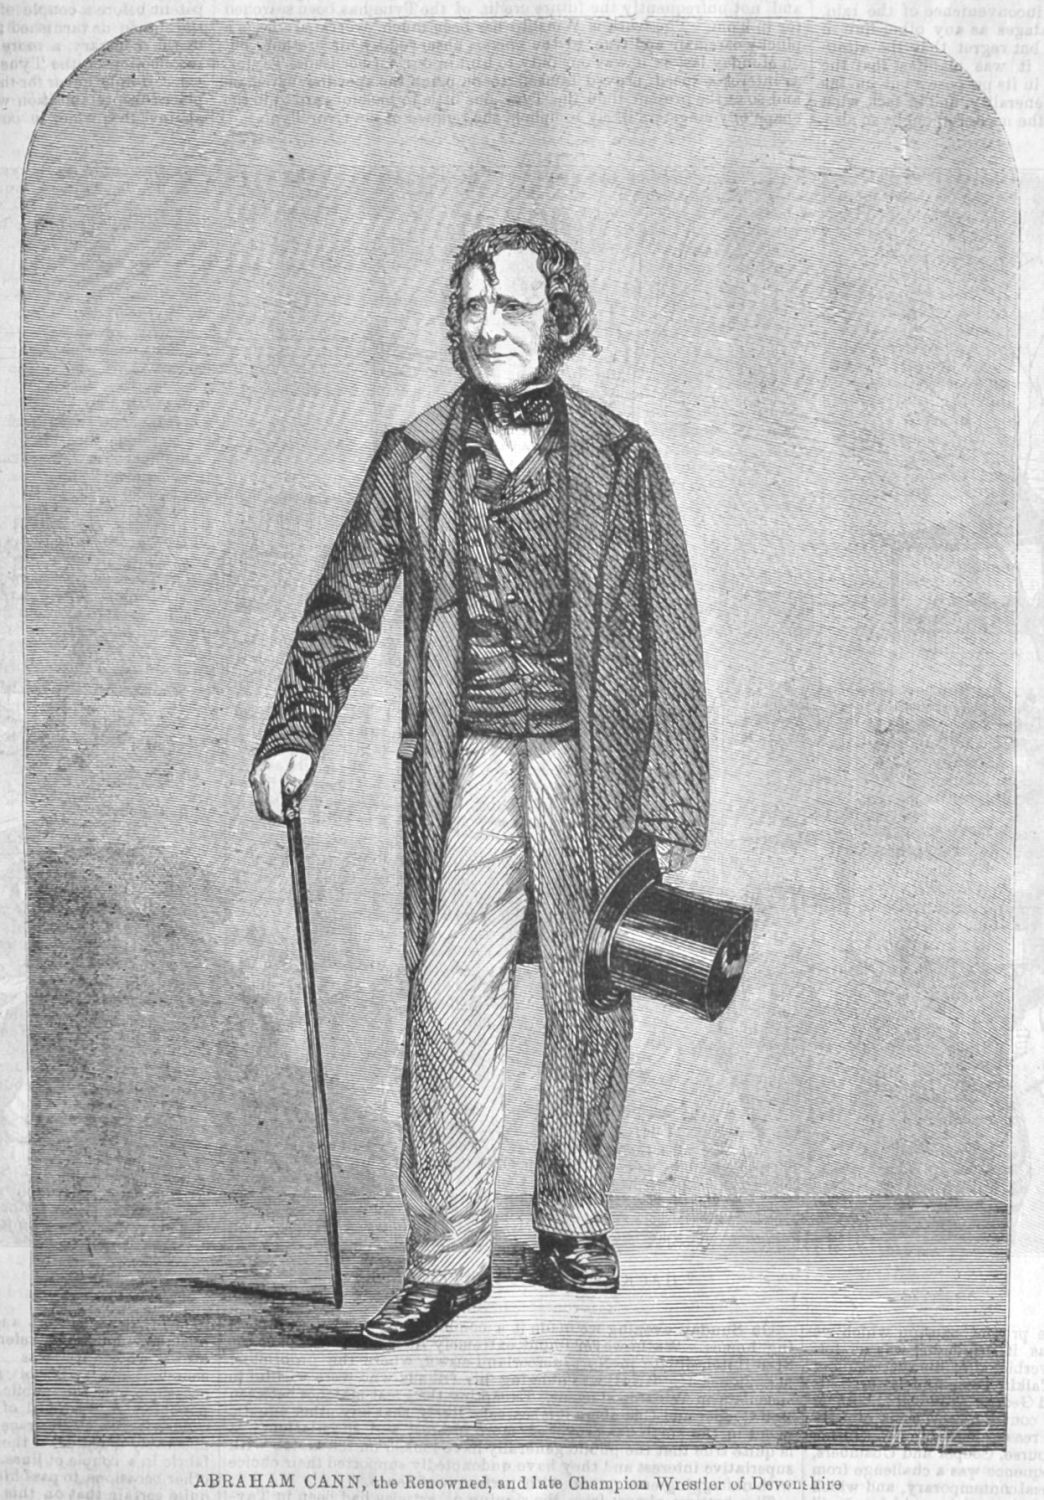 Abraham Cann, the Renowned, and late Champion Wrestler of Devonshire.  1866